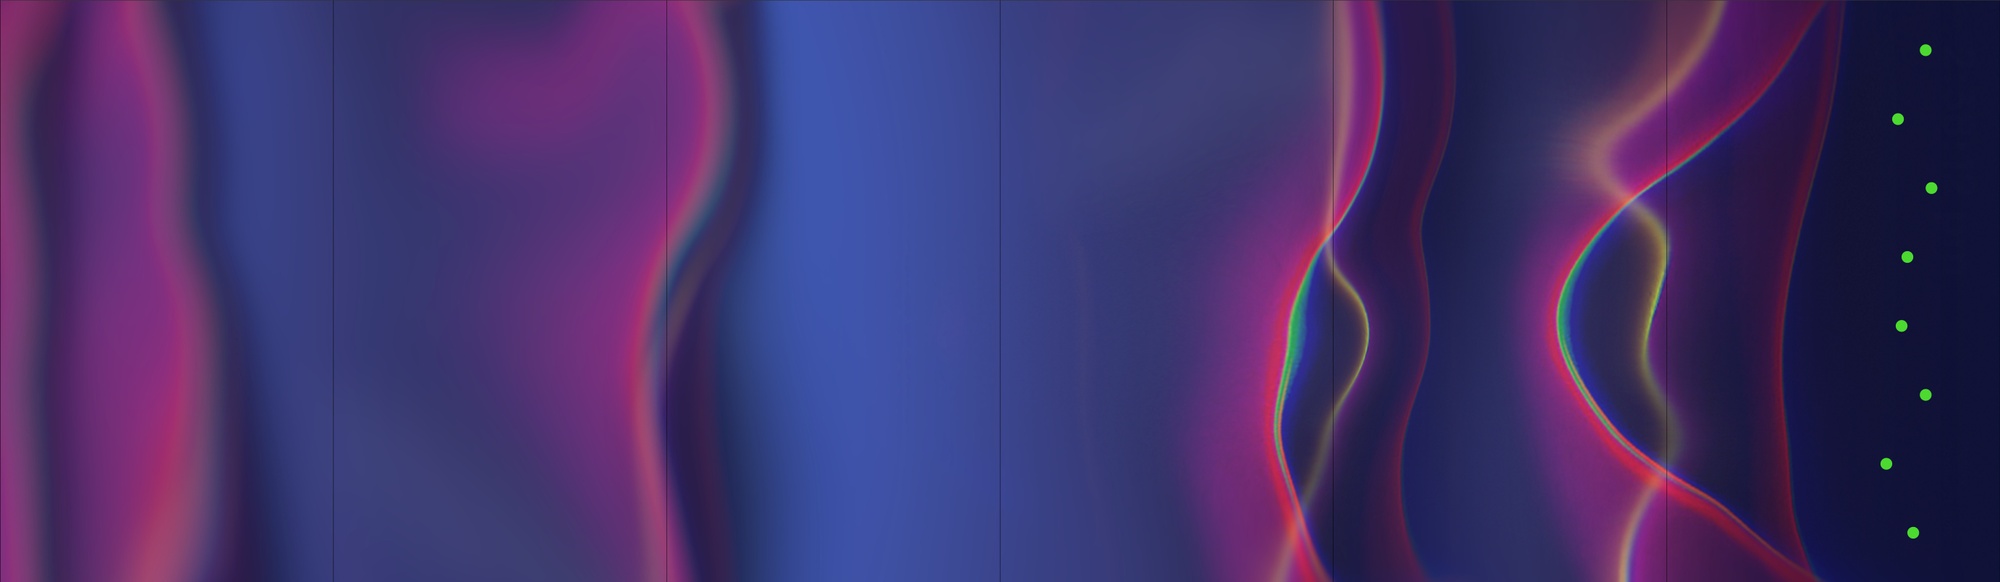 Exploration of lines and gradients in overlapping wave-like forms